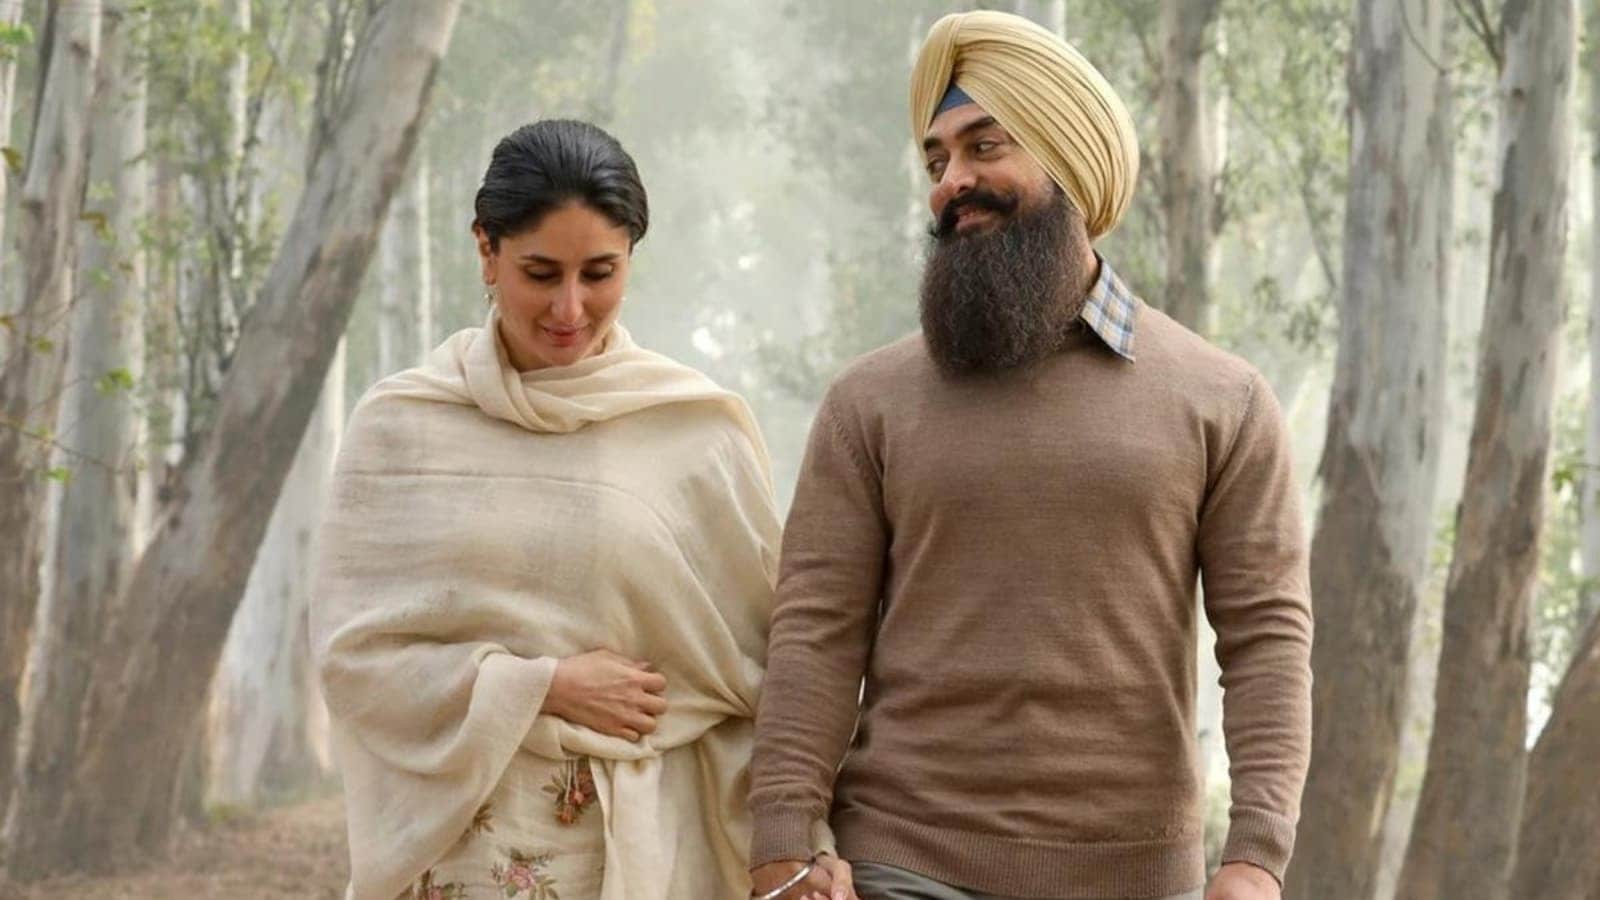 Laal Singh Chaddha silently lands on Netflix 8 weeks after